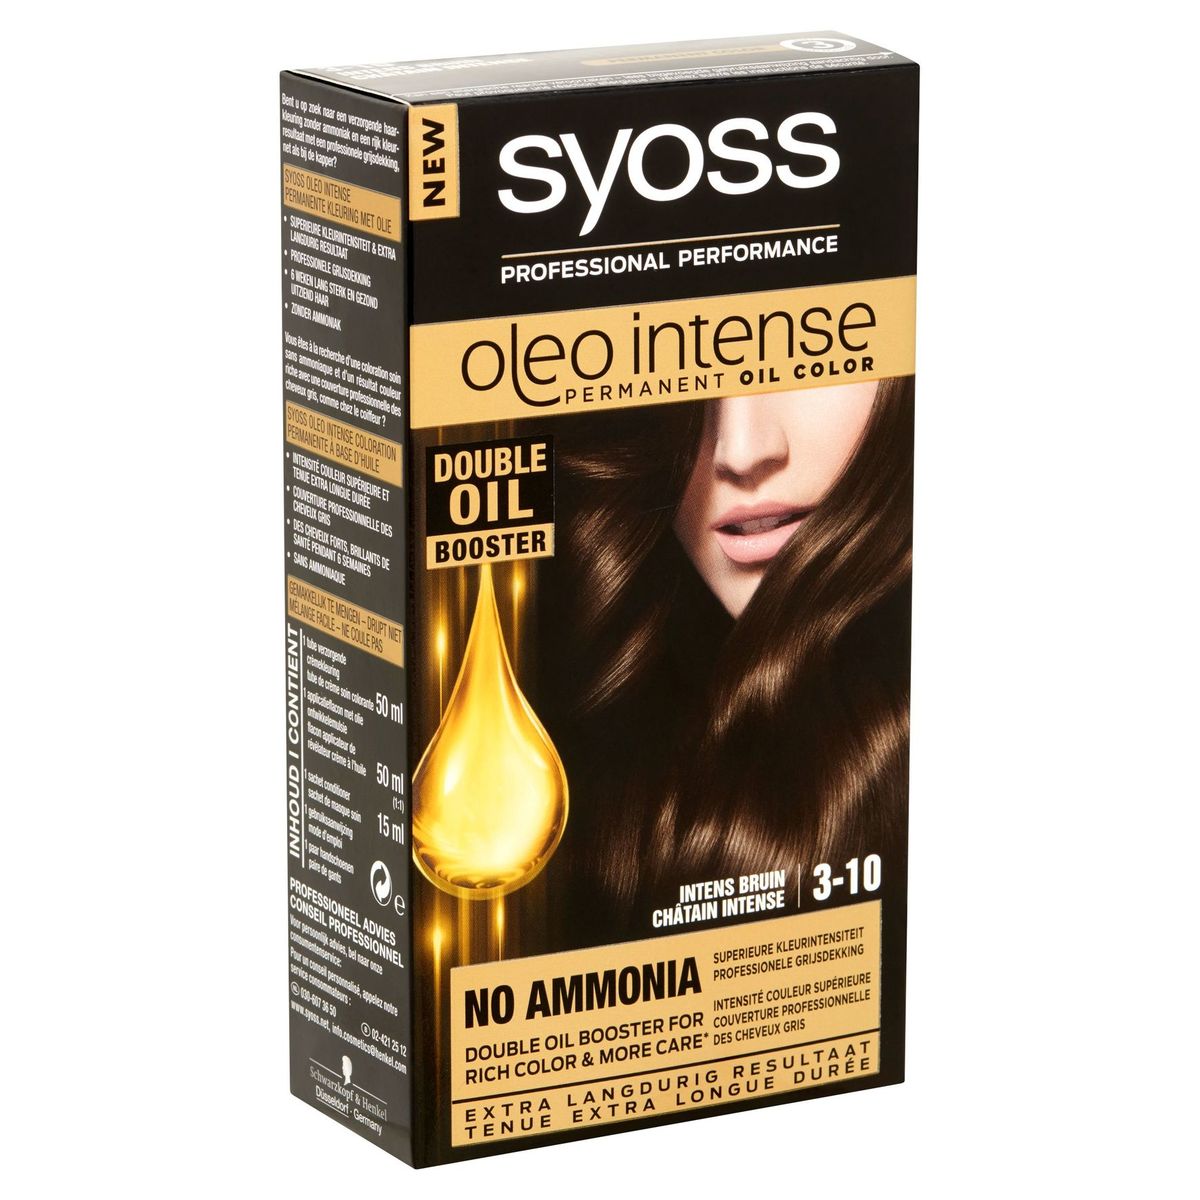 Syoss Oleo Intense Permanent Oil Color 3-10 Châtain Intense